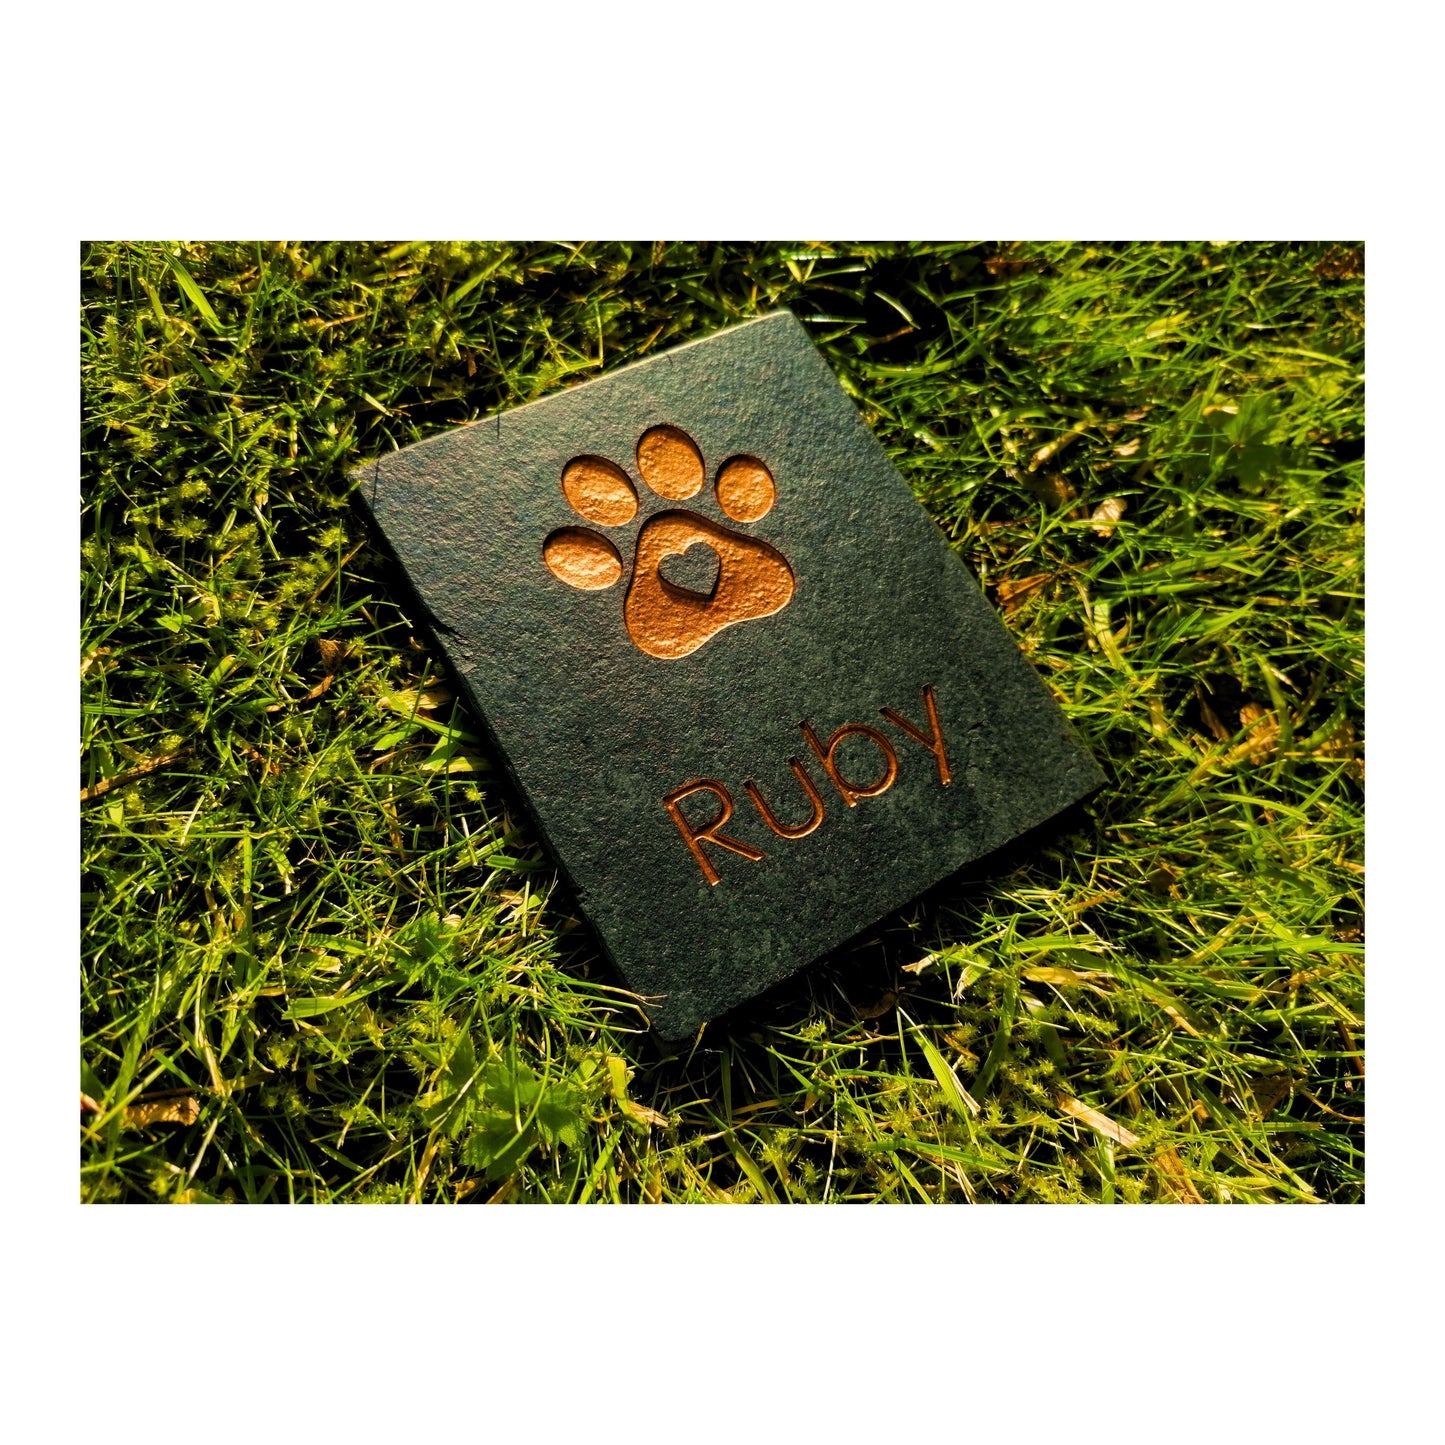 Personalised Custom Pet Paw Print | Engraved Natural Slate Memorial Plaque | Gold Copper Silver | Memories Tributes Markers Stone Headstones